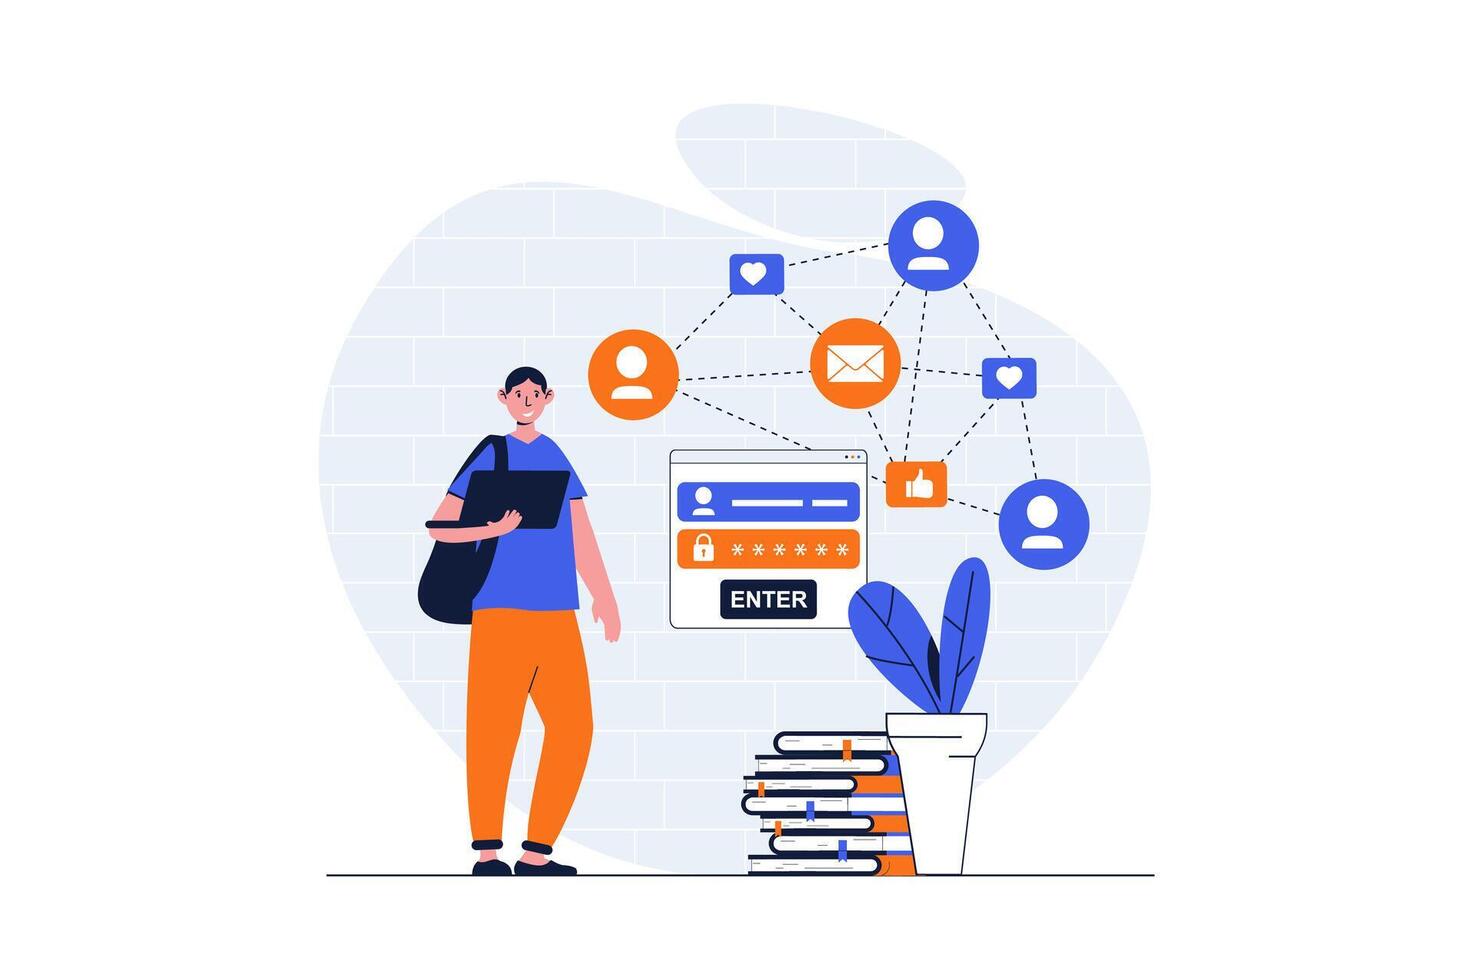 Social network web concept with character scene. Man login to personal account and communicating with friends. People situation in flat design. Vector illustration for social media marketing material.